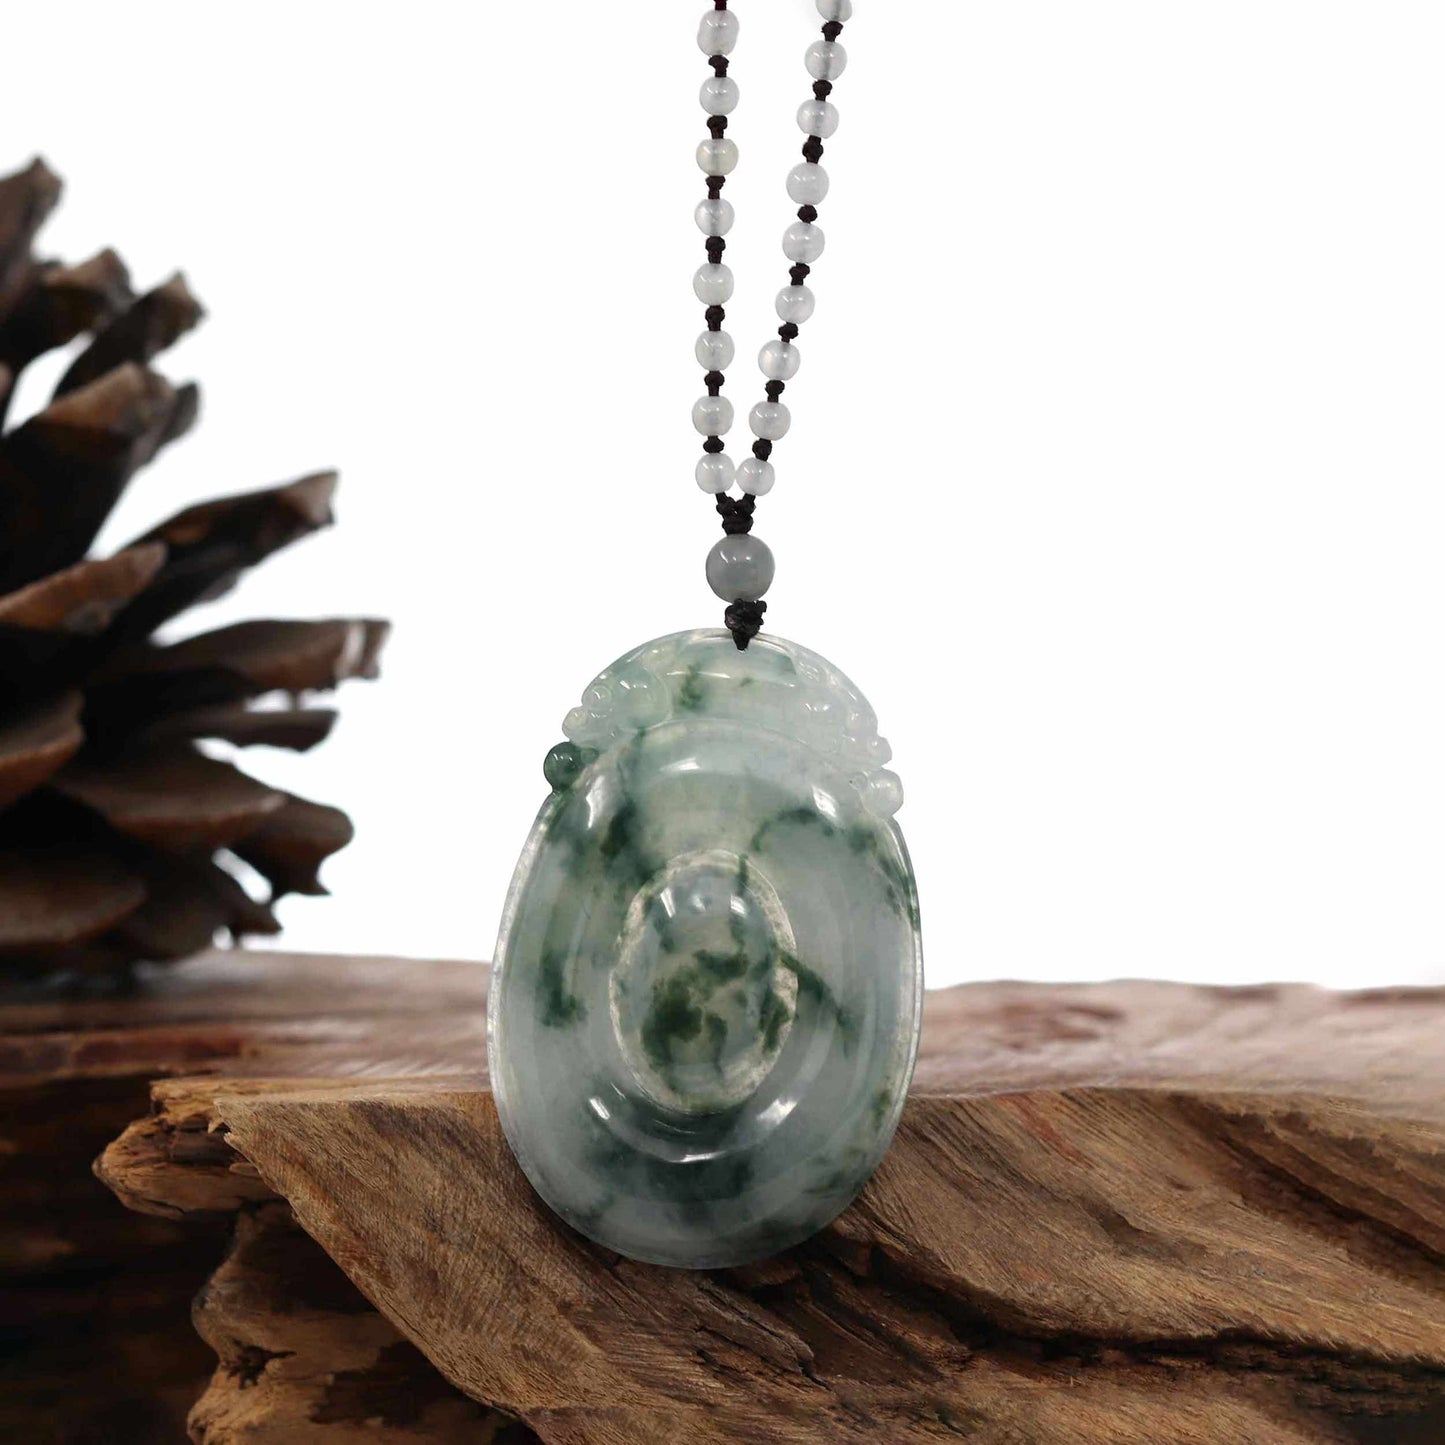 Genuine Ice Blue-Green Jadeite Jade "Good Luck Oval with Dragon Accent" Pendant Necklace With Real Jadeite Bead Necklace